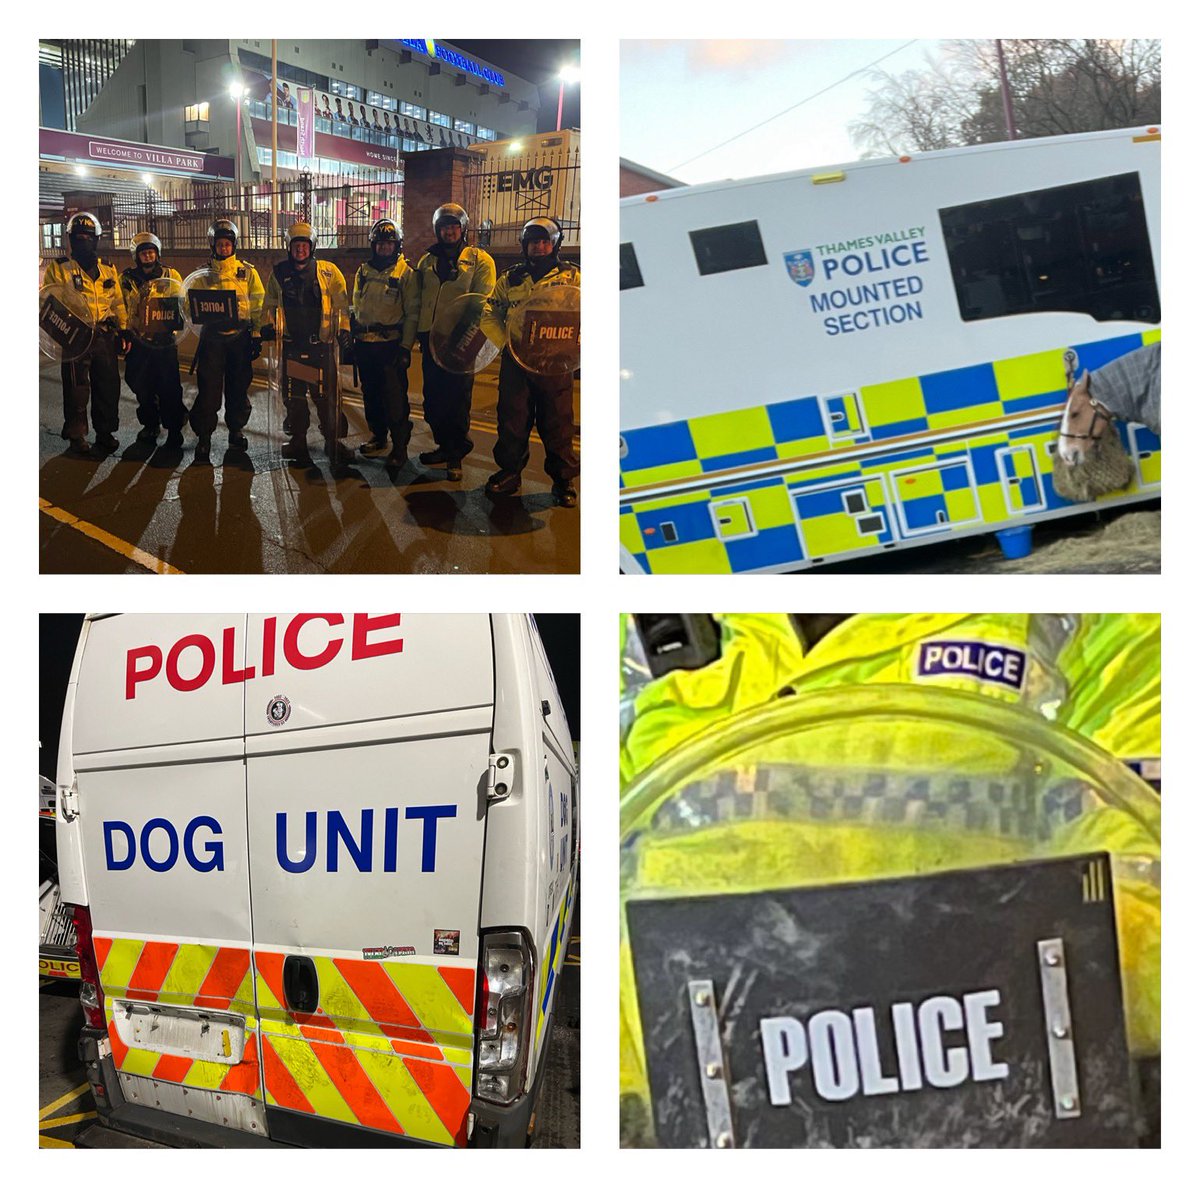 Officers from @NWorcsCops @HshireCops @OPUWorcs helping out @WMPolice & @TVP_horses with policing the serious disorder outside the football last night . Total professionalism shown by all police officers in attendance. @WestMercPolFed OR95